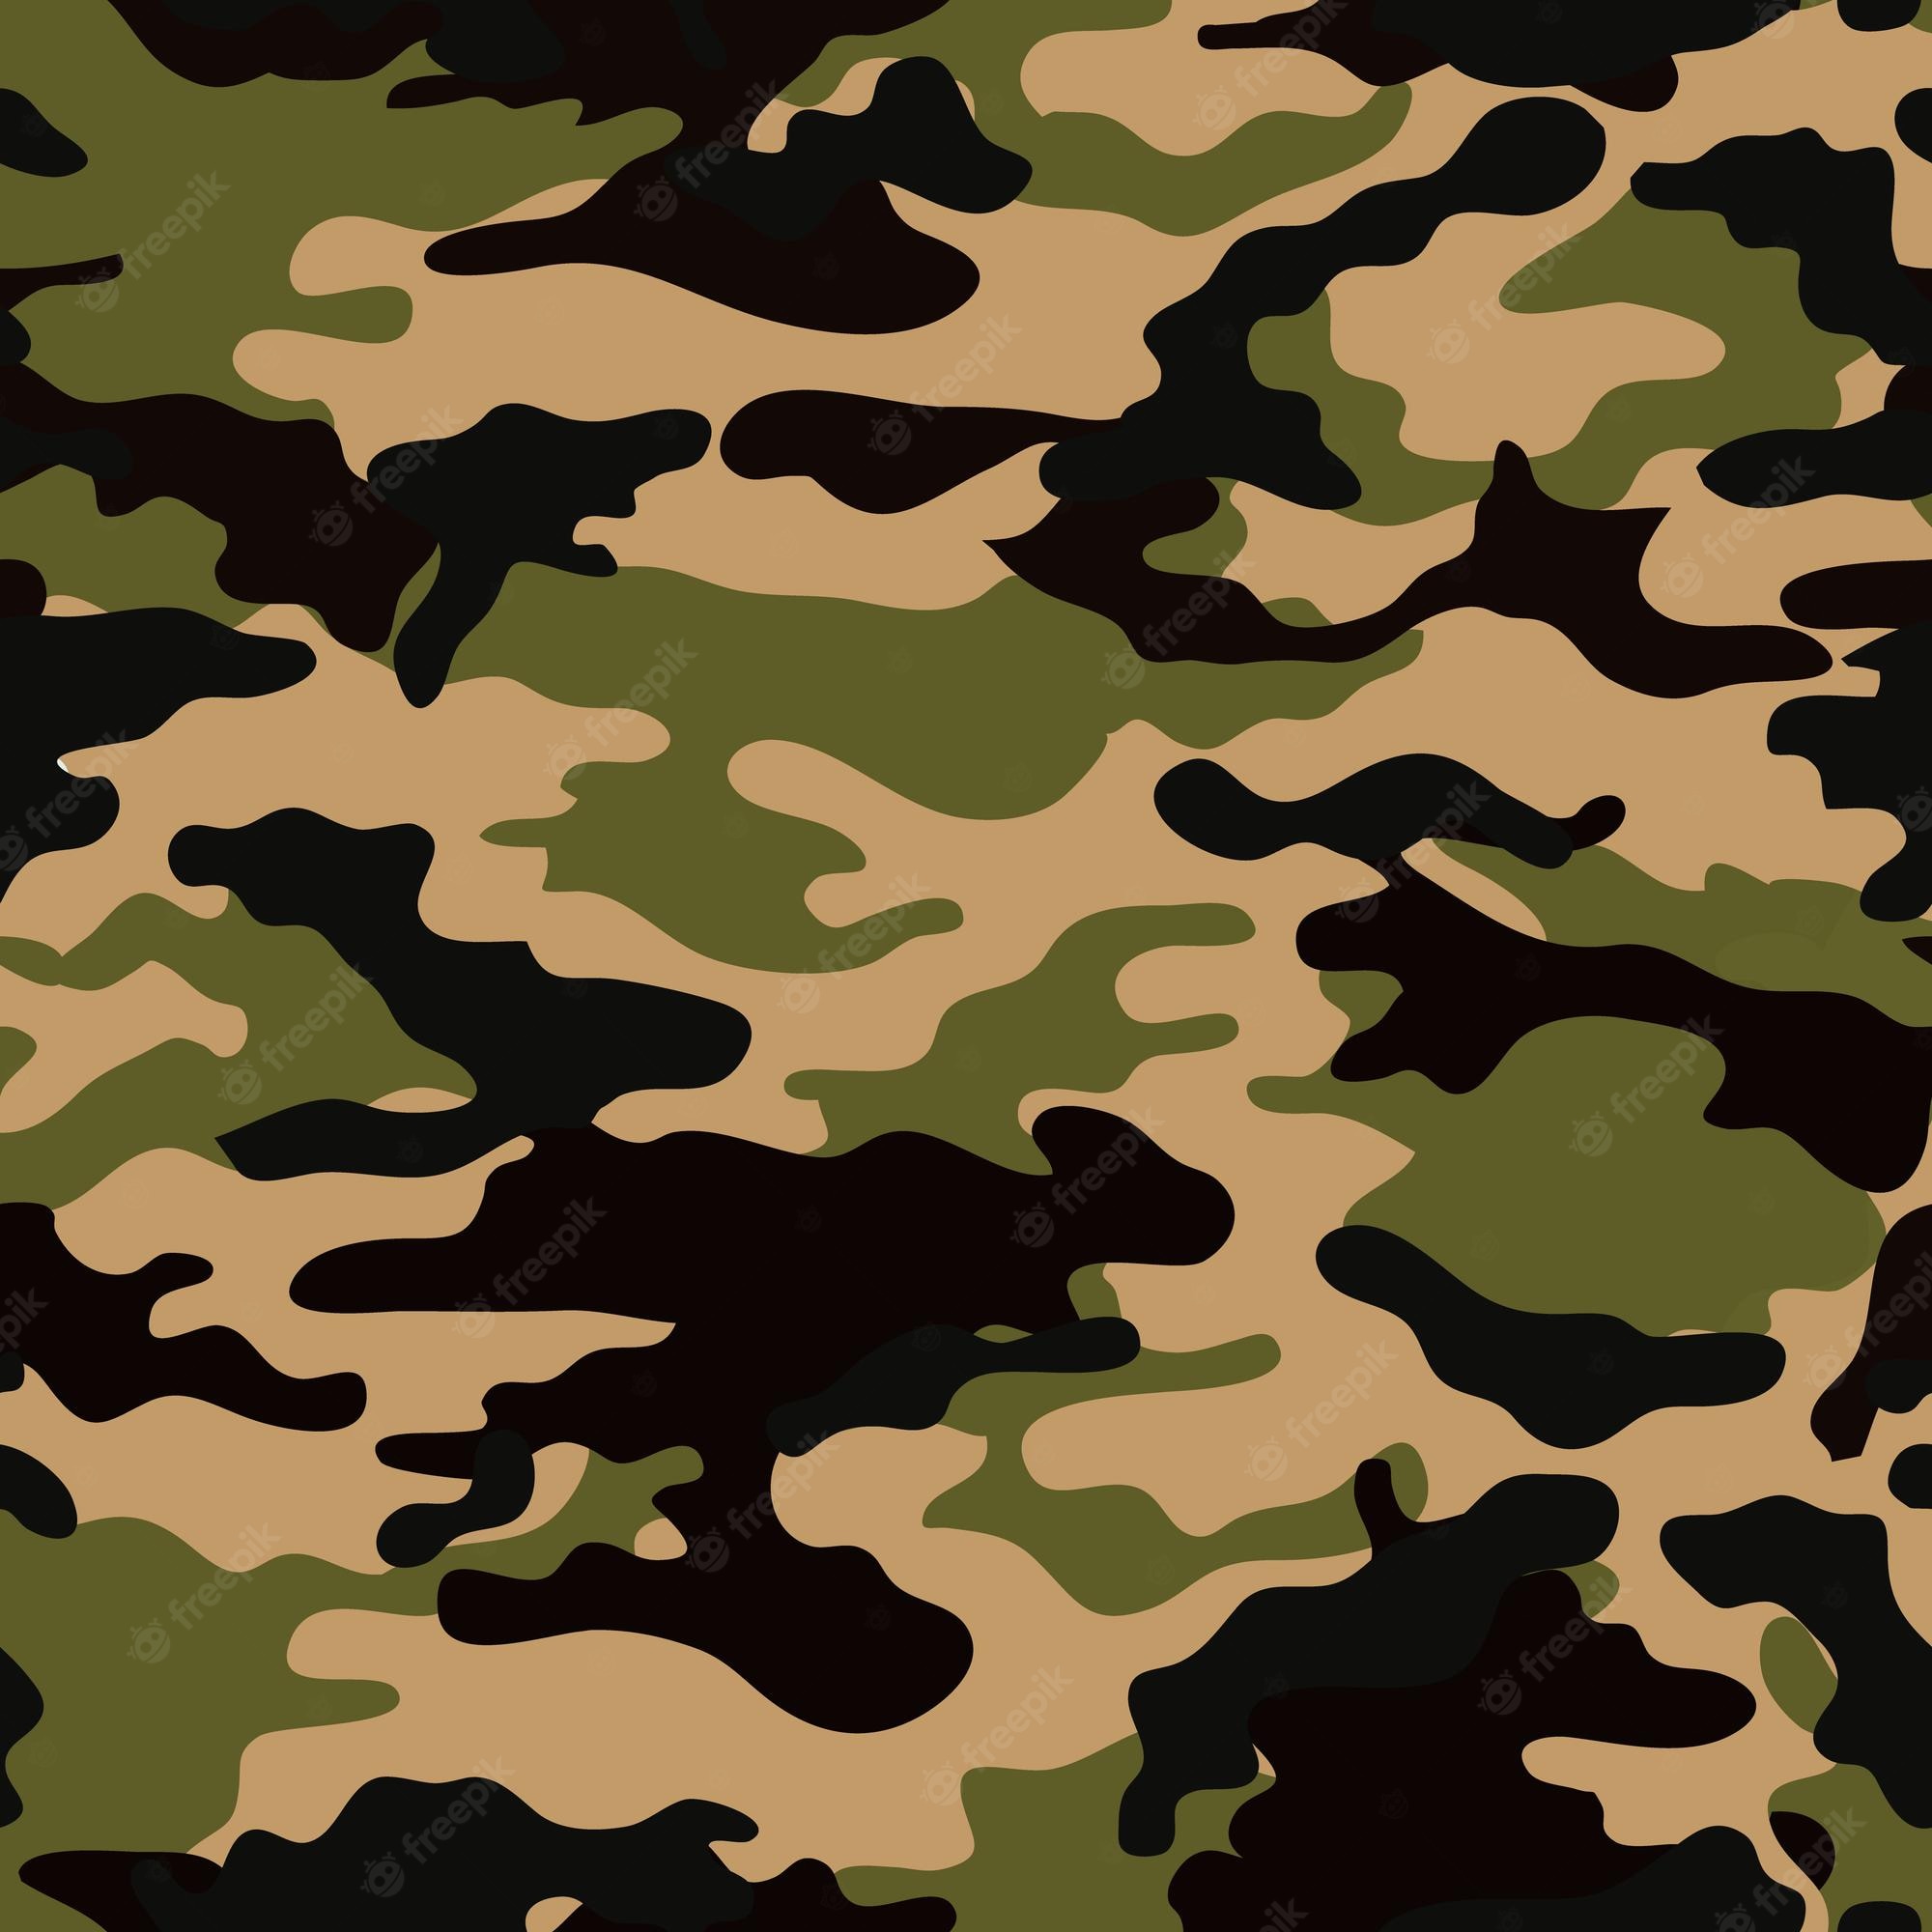 Camouflage Seamless Vector Patterns SVG, Graphic by